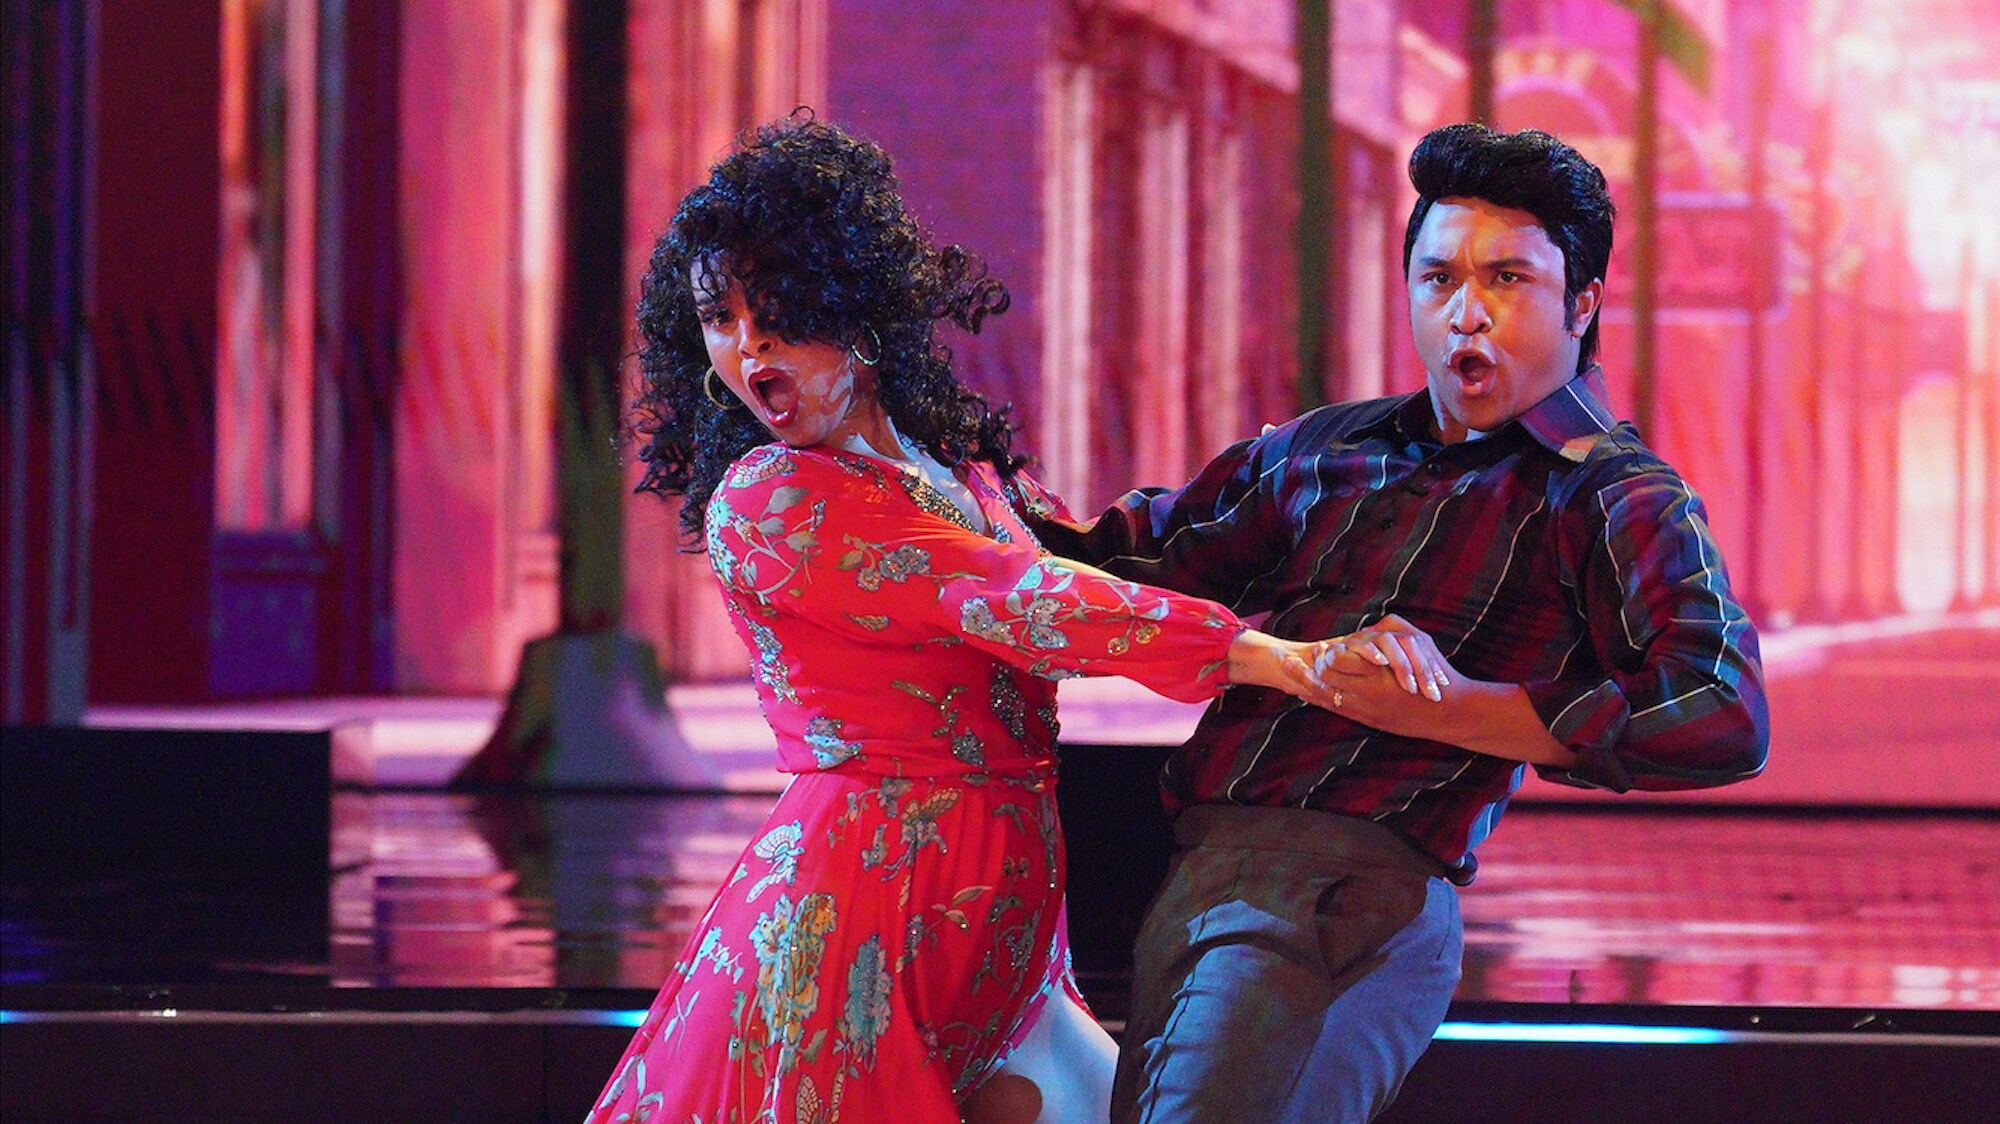 DANCING WITH THE STARS - “Elvis Night” –  The 15 remaining couples “Can’t Help Falling in Love” with Elvis this week as they take on all-new dance styles to music by The King of Rock ‘n’ Roll. Week two of the mirorrball competition will stream live MONDAY, SEPT. 26 (8:00pm ET / 5:00pm PT), on Disney+. (ABC/Christopher Willard) JORDIN SPARKS, BRANDON ARMSTRONG